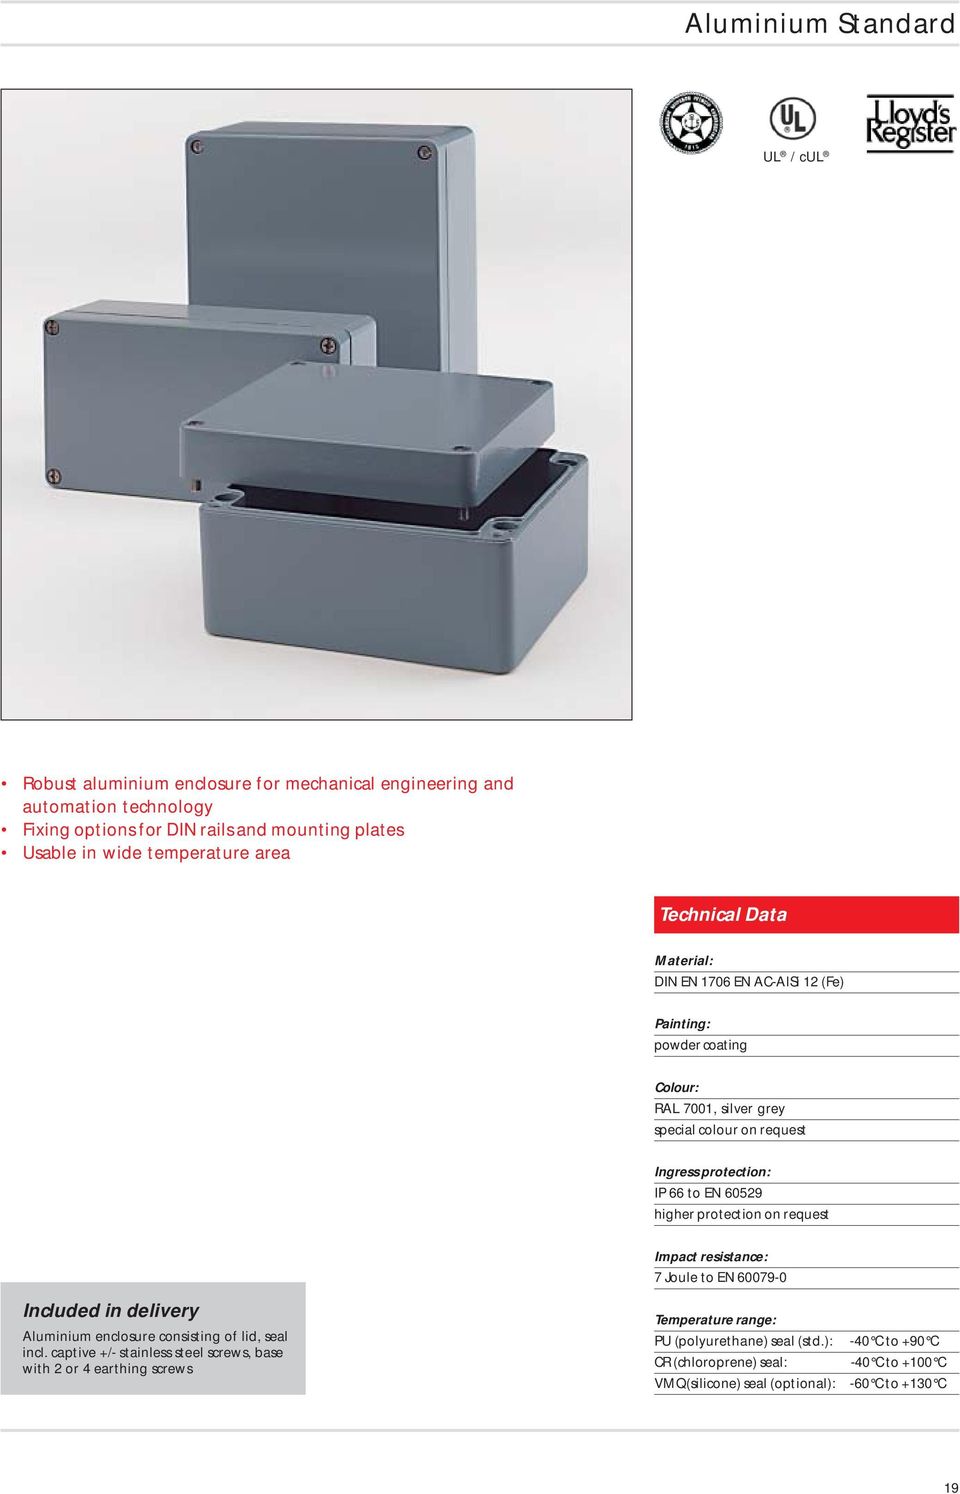 6059 higher protection Included in delivery luminium enclosure consisting of lid, seal incl.